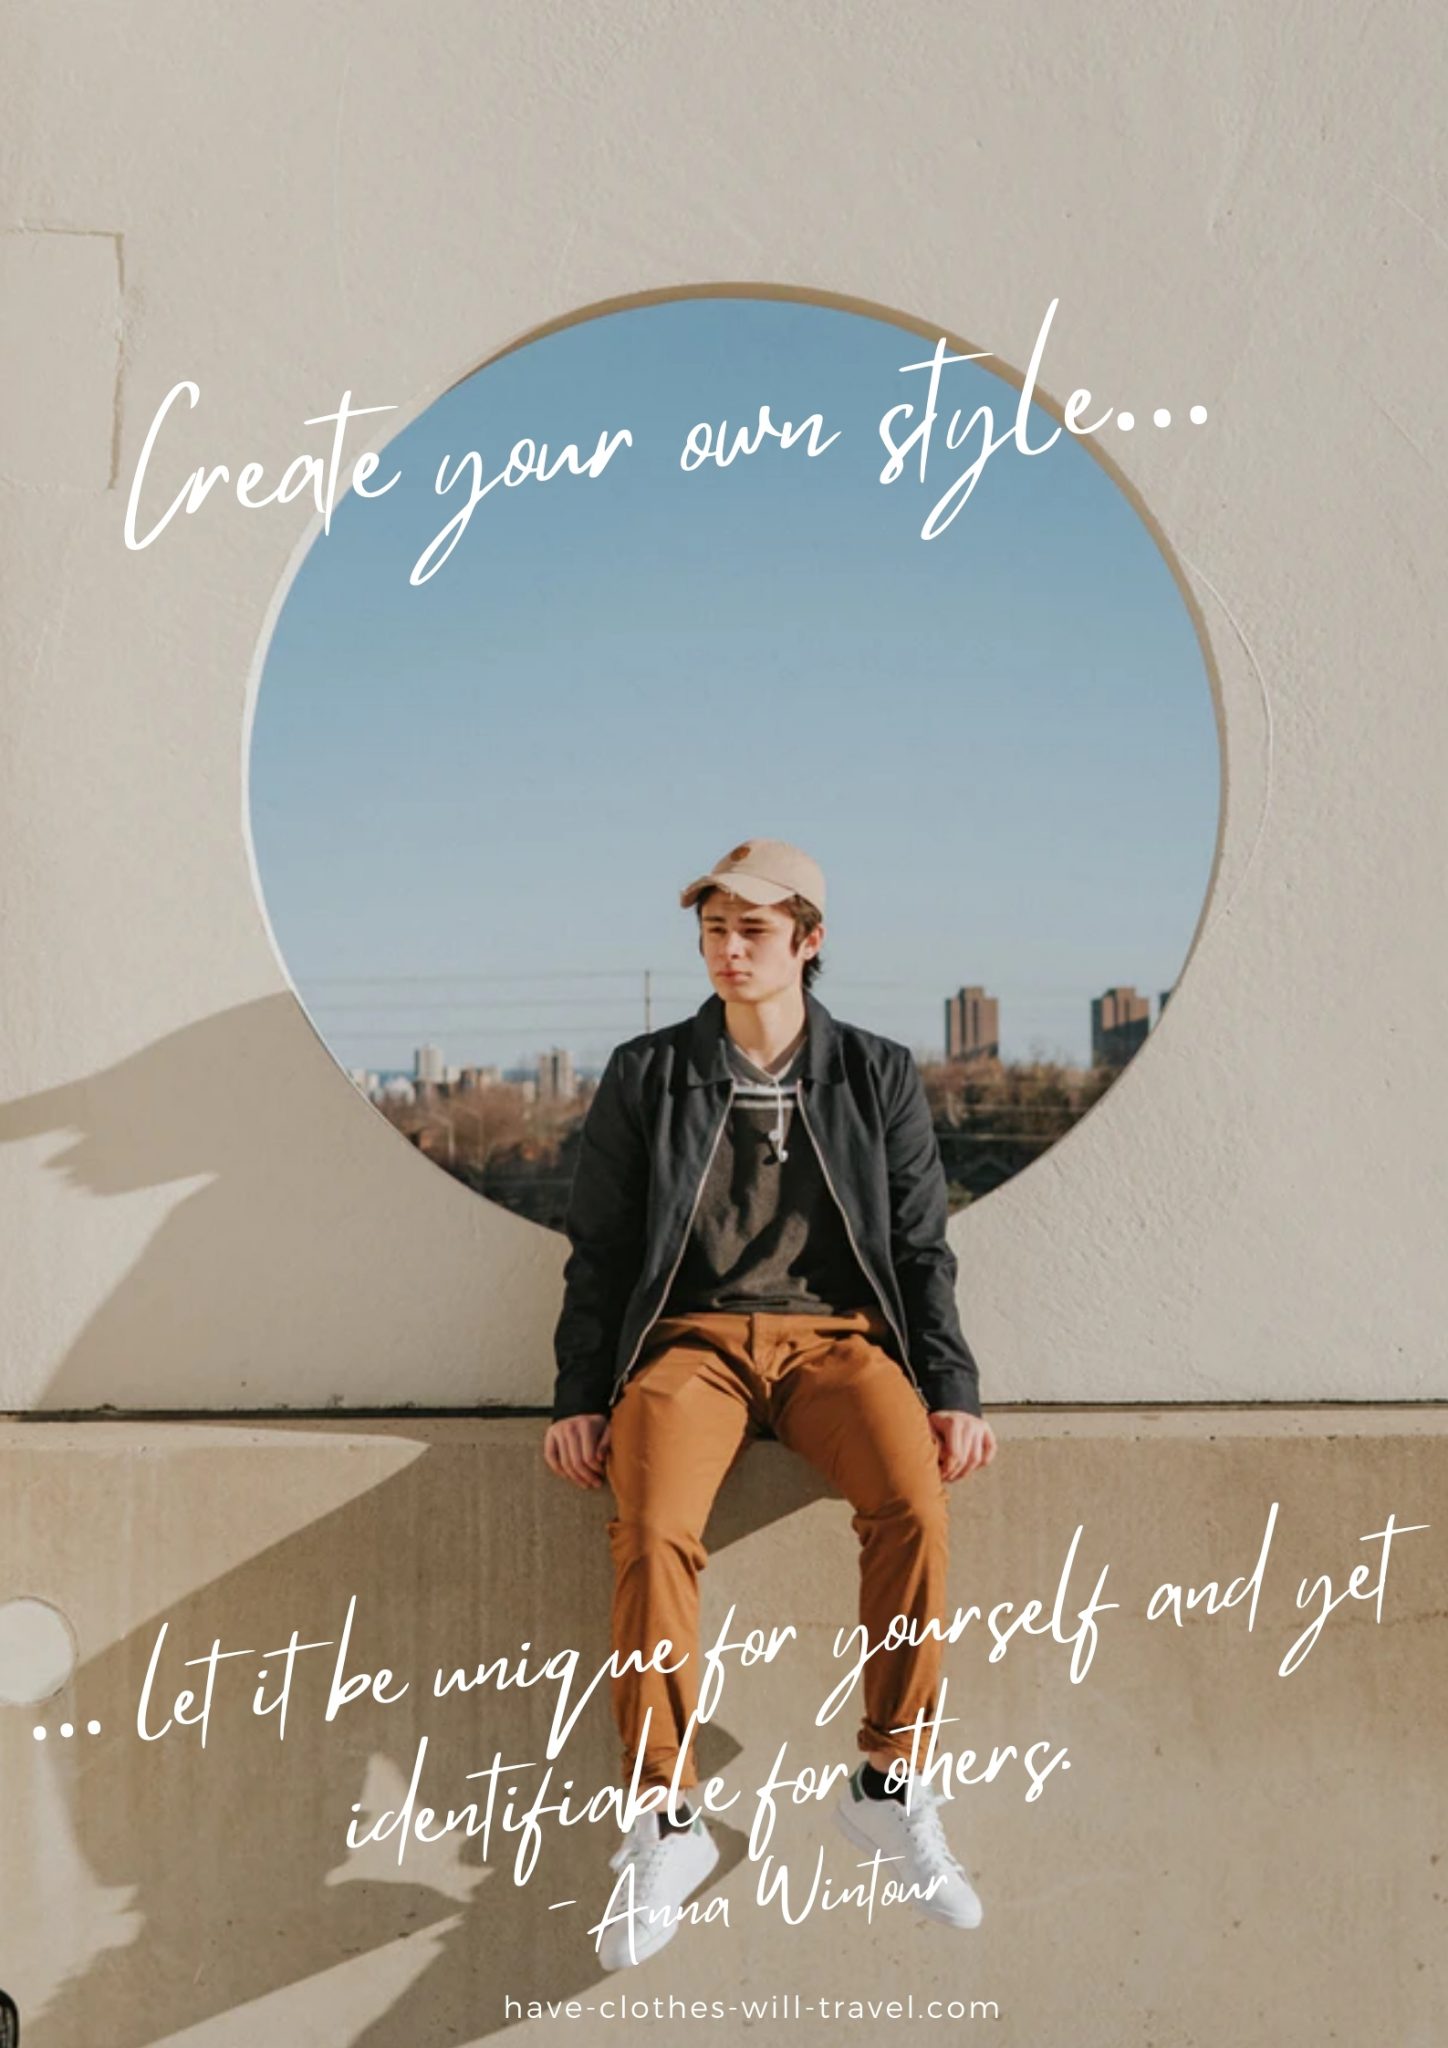 A young, stylish man wearing a hat, jacket, and brown pants sits on a concrete ledge in front of a large circular cut-out structure with a city skyline in the background. Text across the top and bottom of the image says, "Create your own style… let it be unique for yourself and yet identifiable for others. ― Anna Wintour"